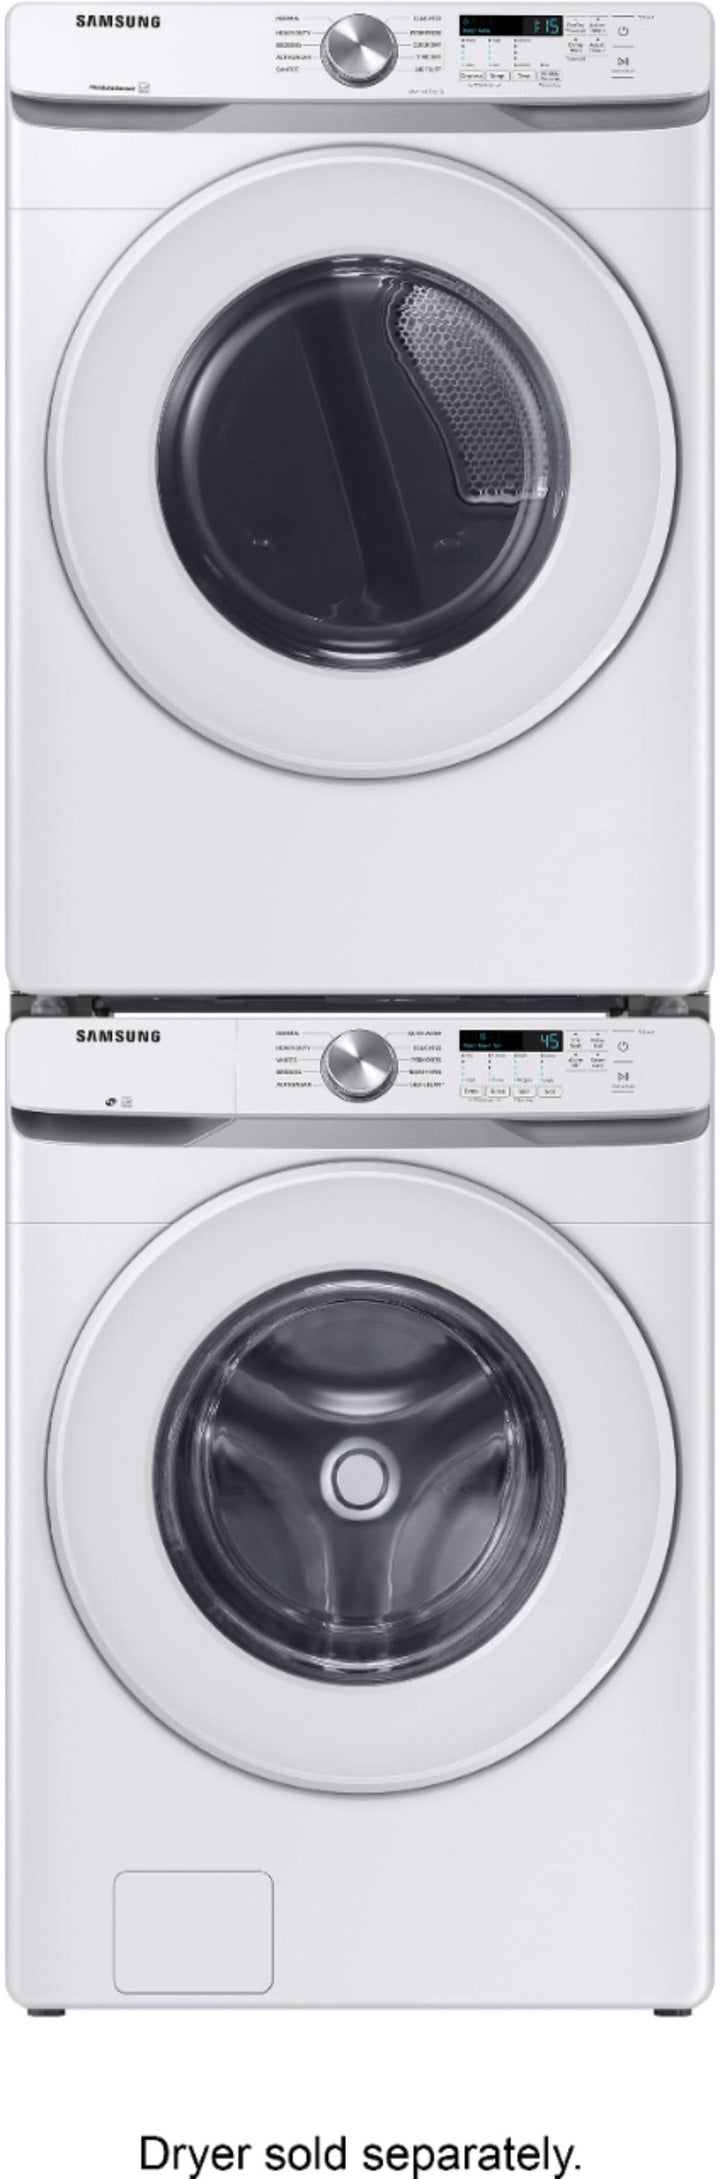 Samsung - 4.5 Cu. Ft. High Efficiency Stackable Front Load Washer with Vibration Reduction Technology+ - White_5